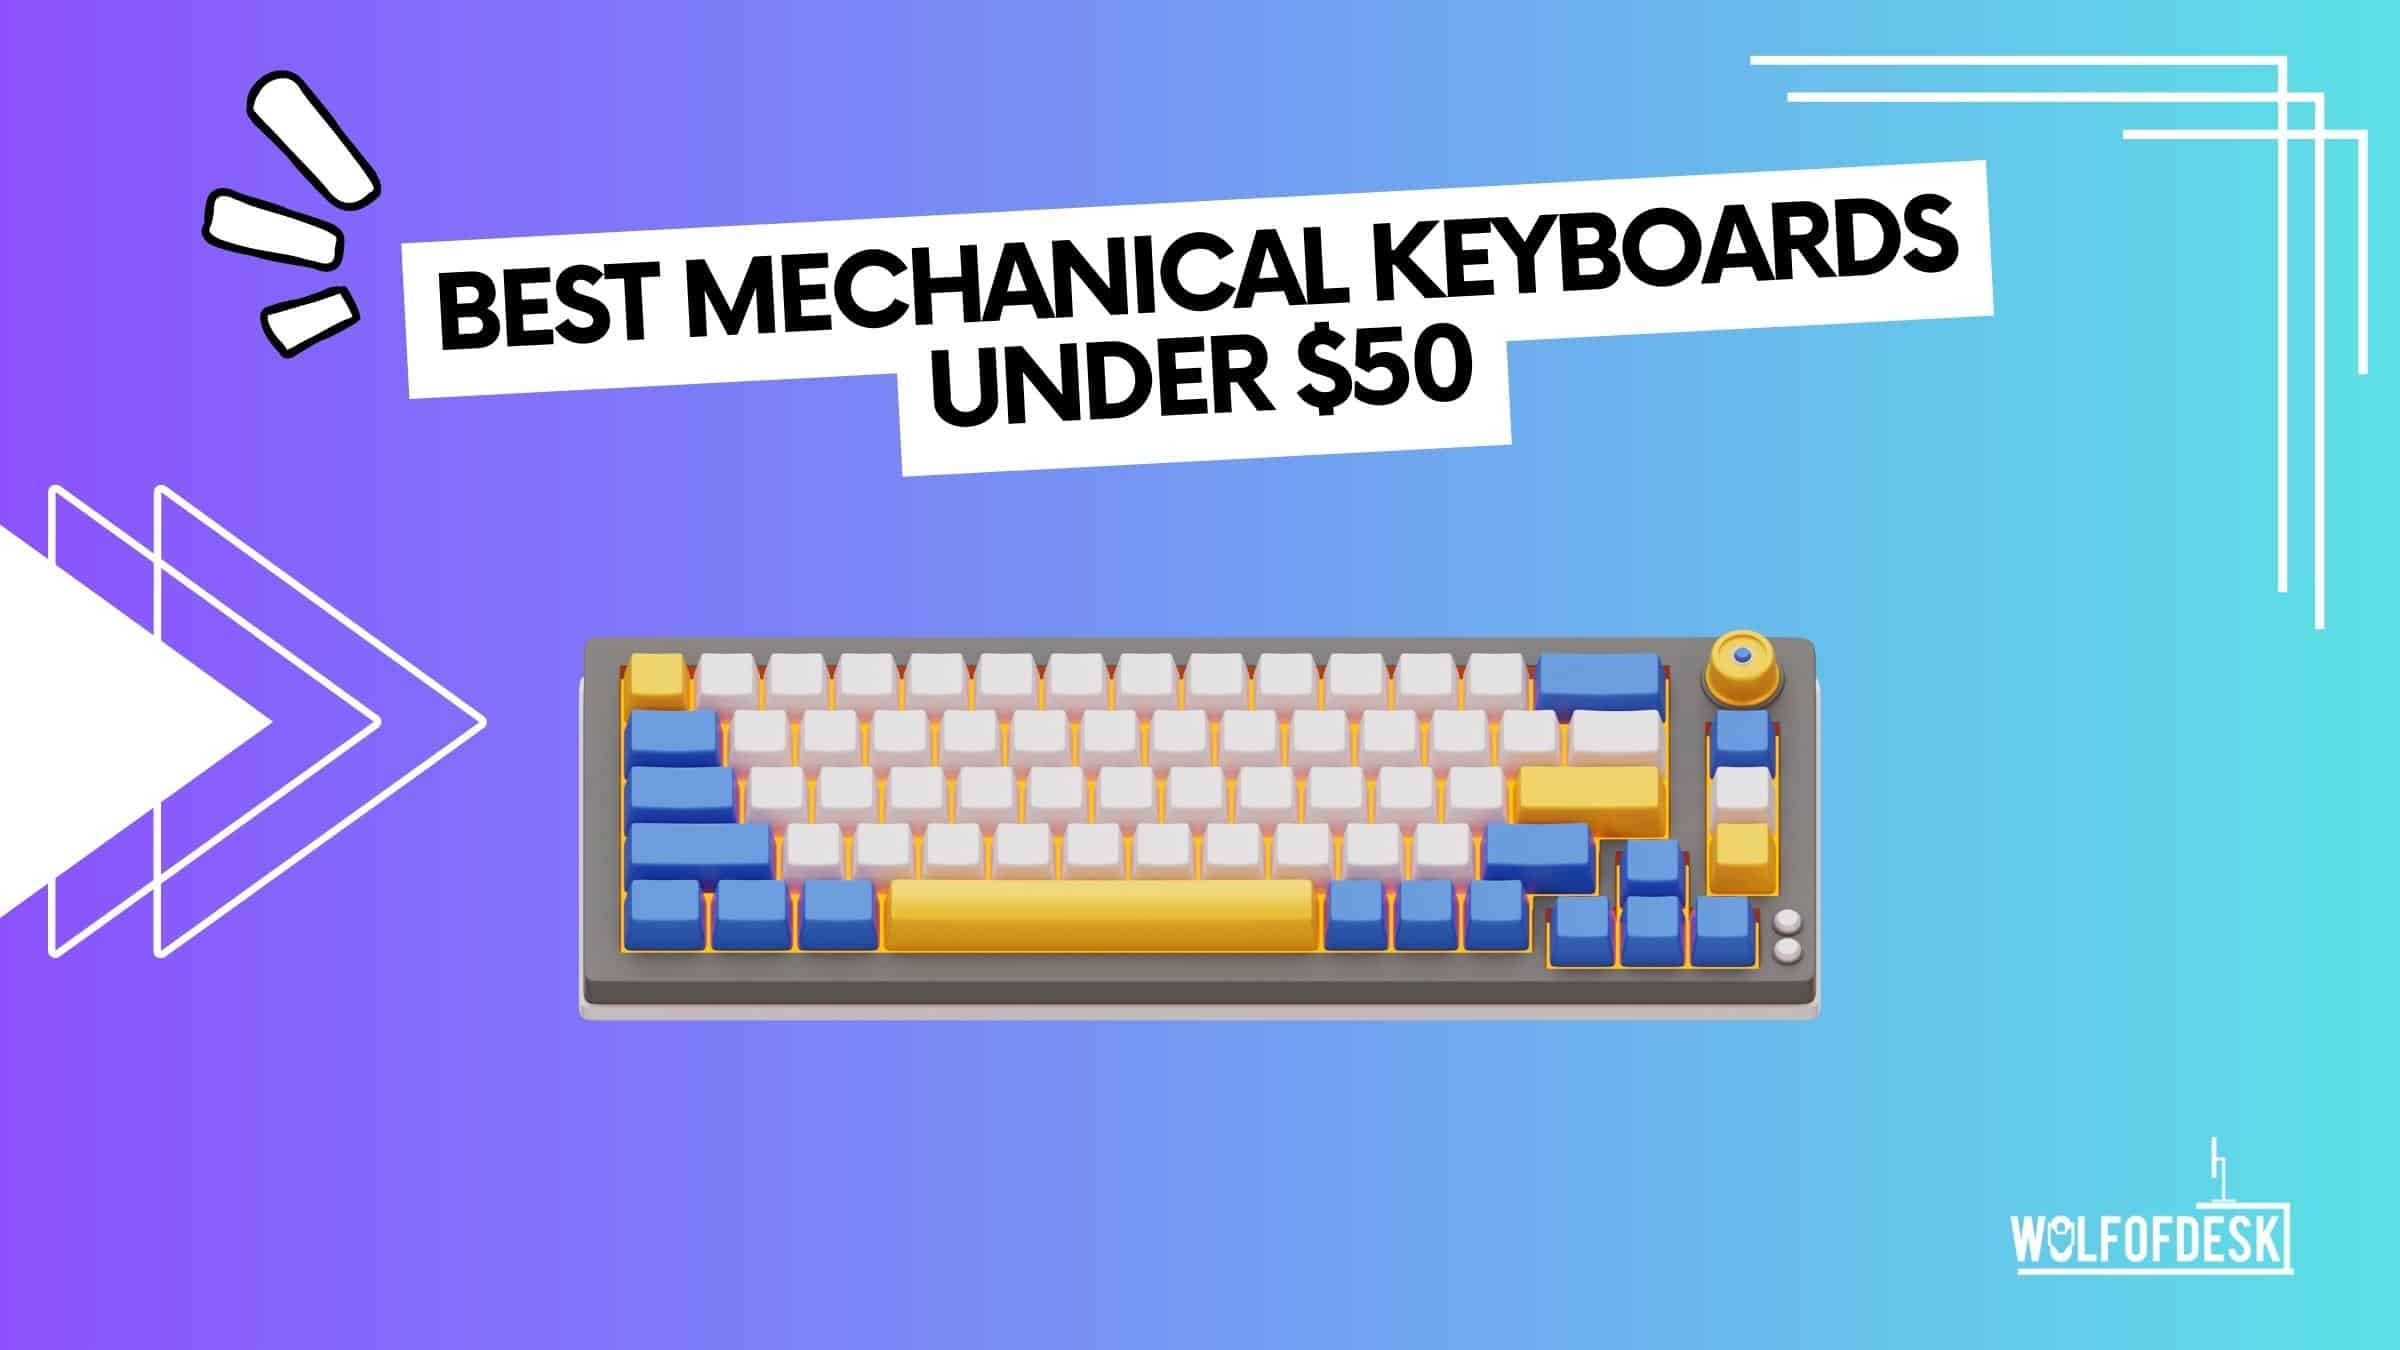 best mechanical keyboards under $50 - top list with pros and cons